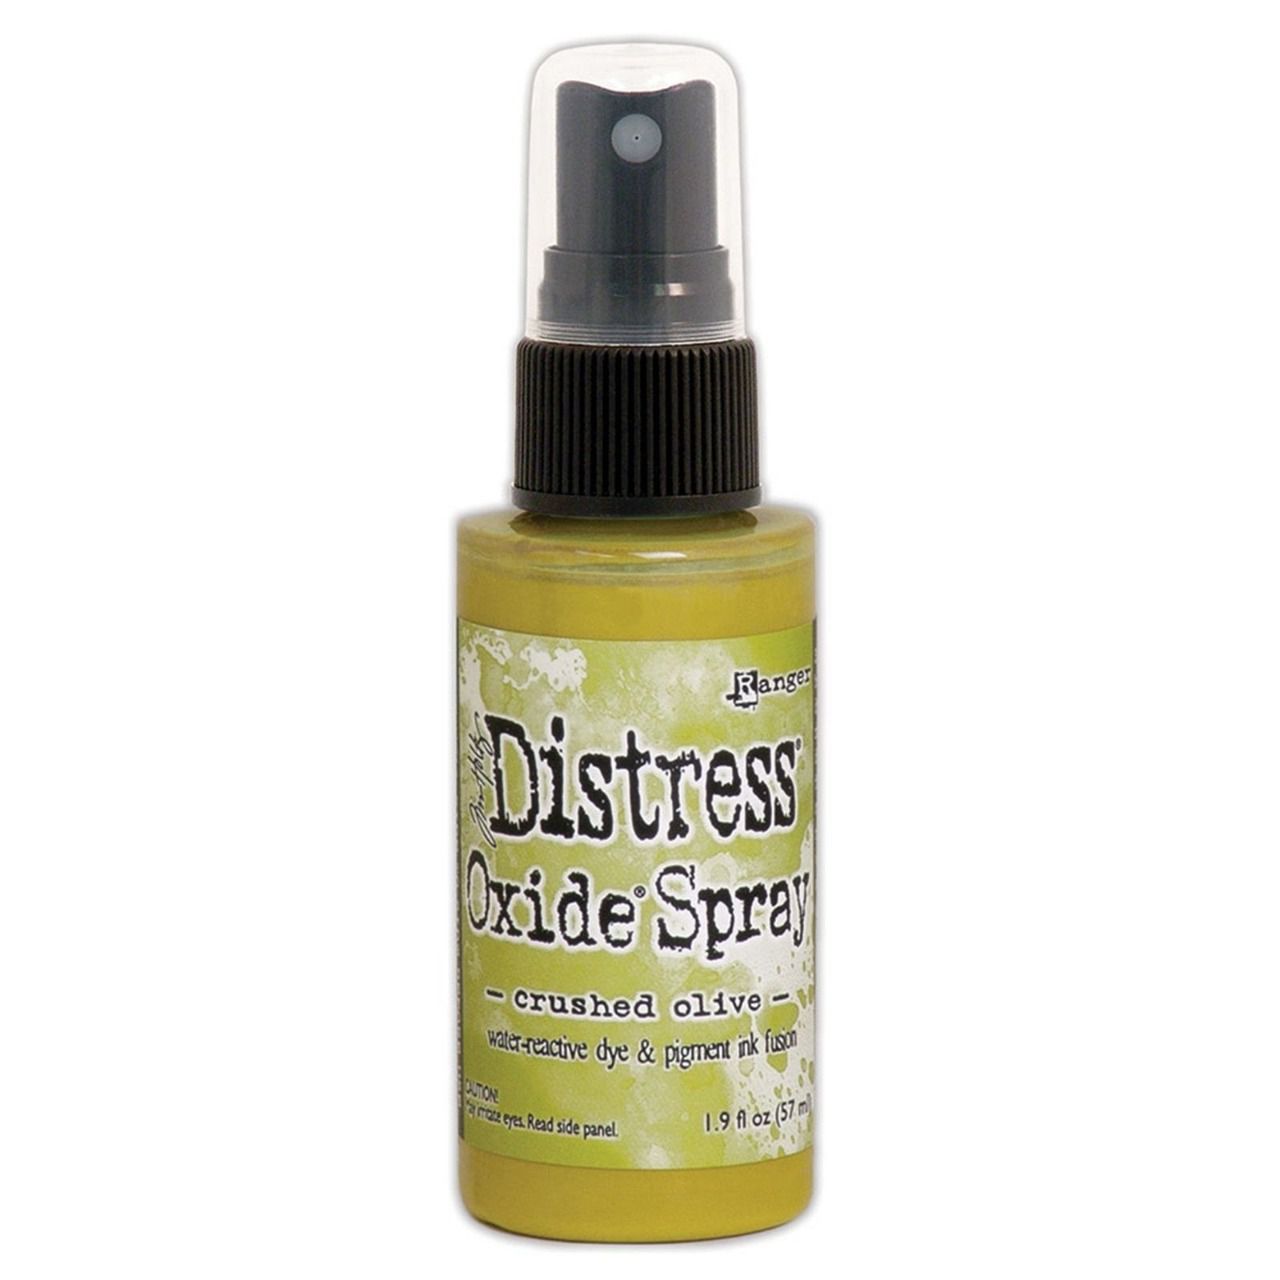 Distress spray oxide : Crushed olive